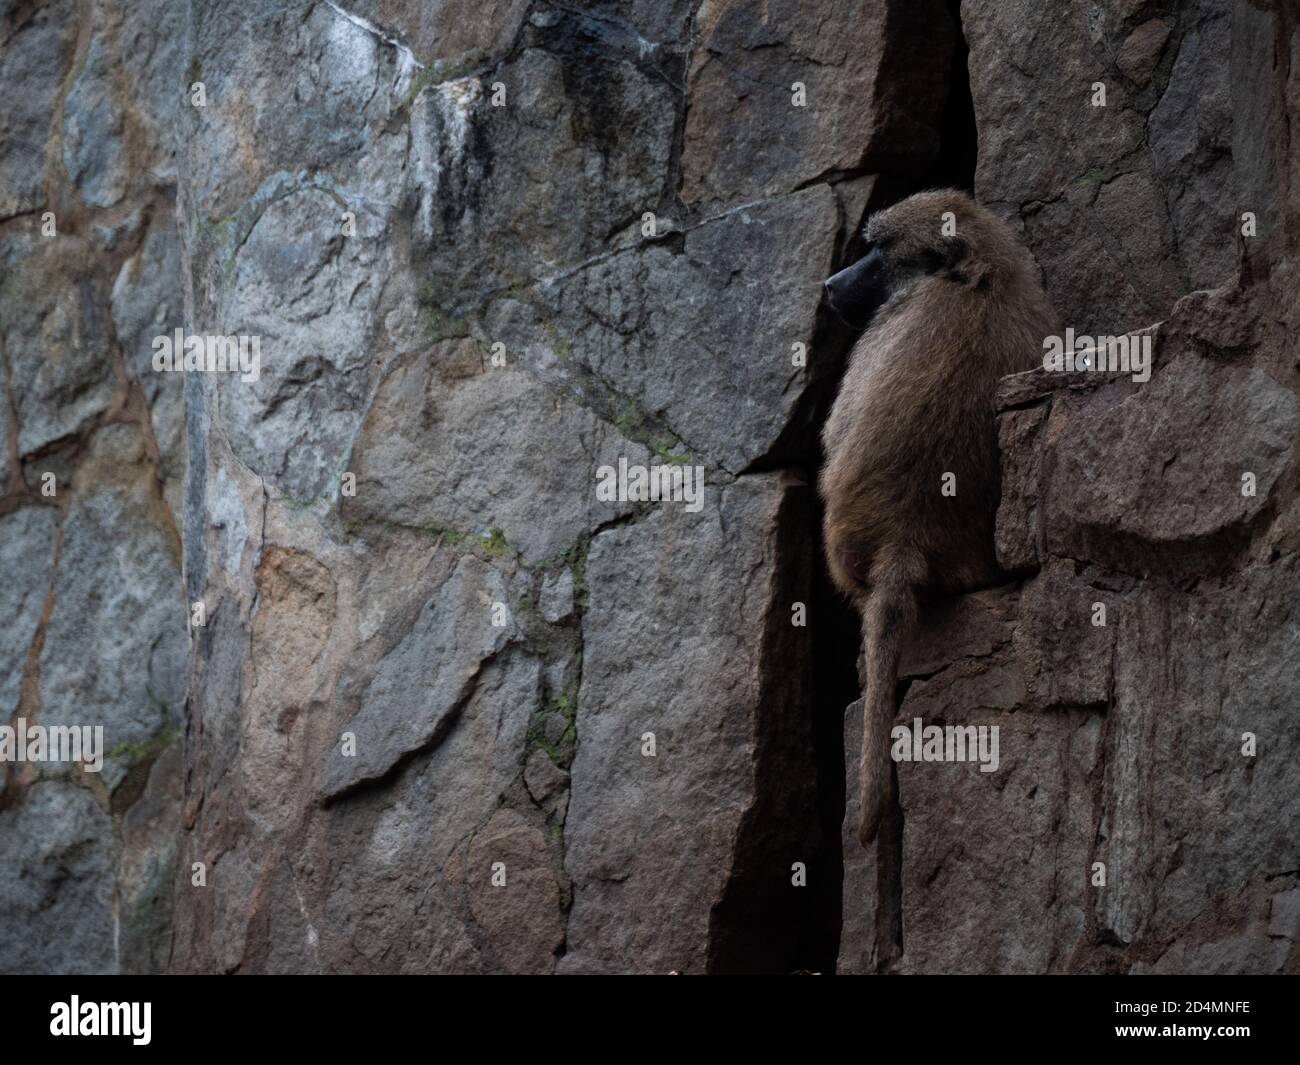 Brown monkey standing on a rocky wall near a cave Stock Photo